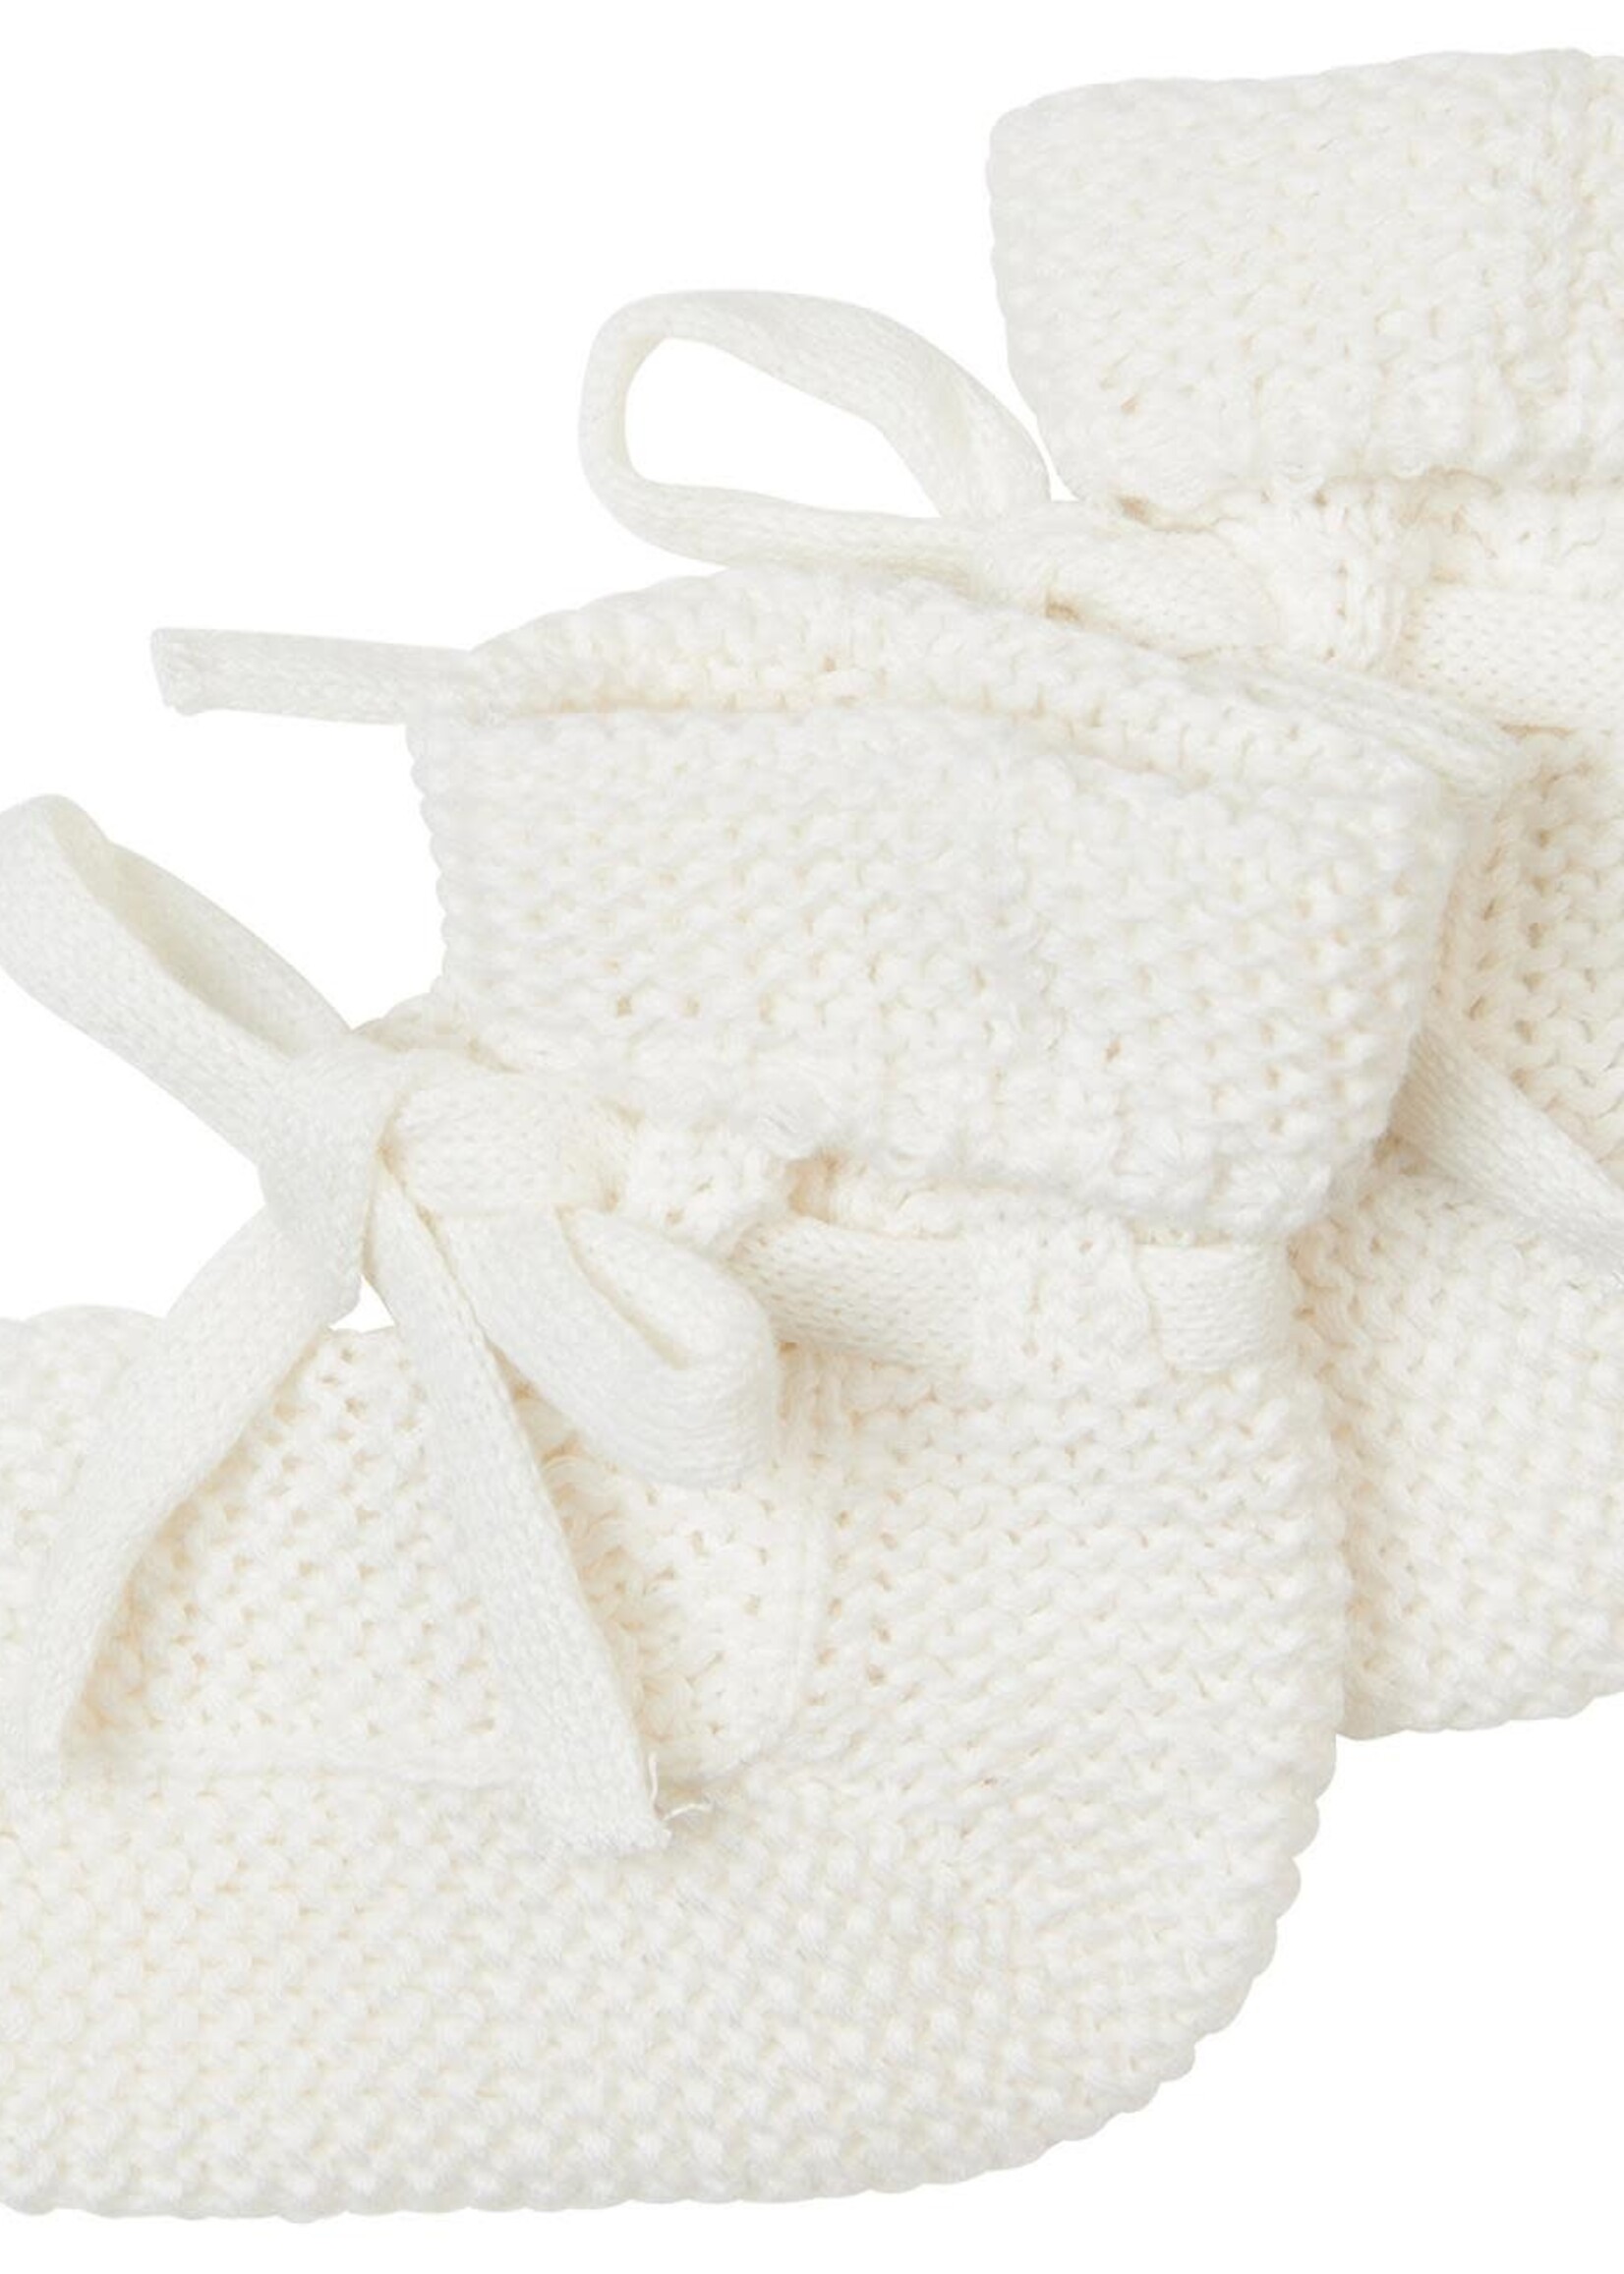 Noppies Noppies Booties Nelson - White 1-size